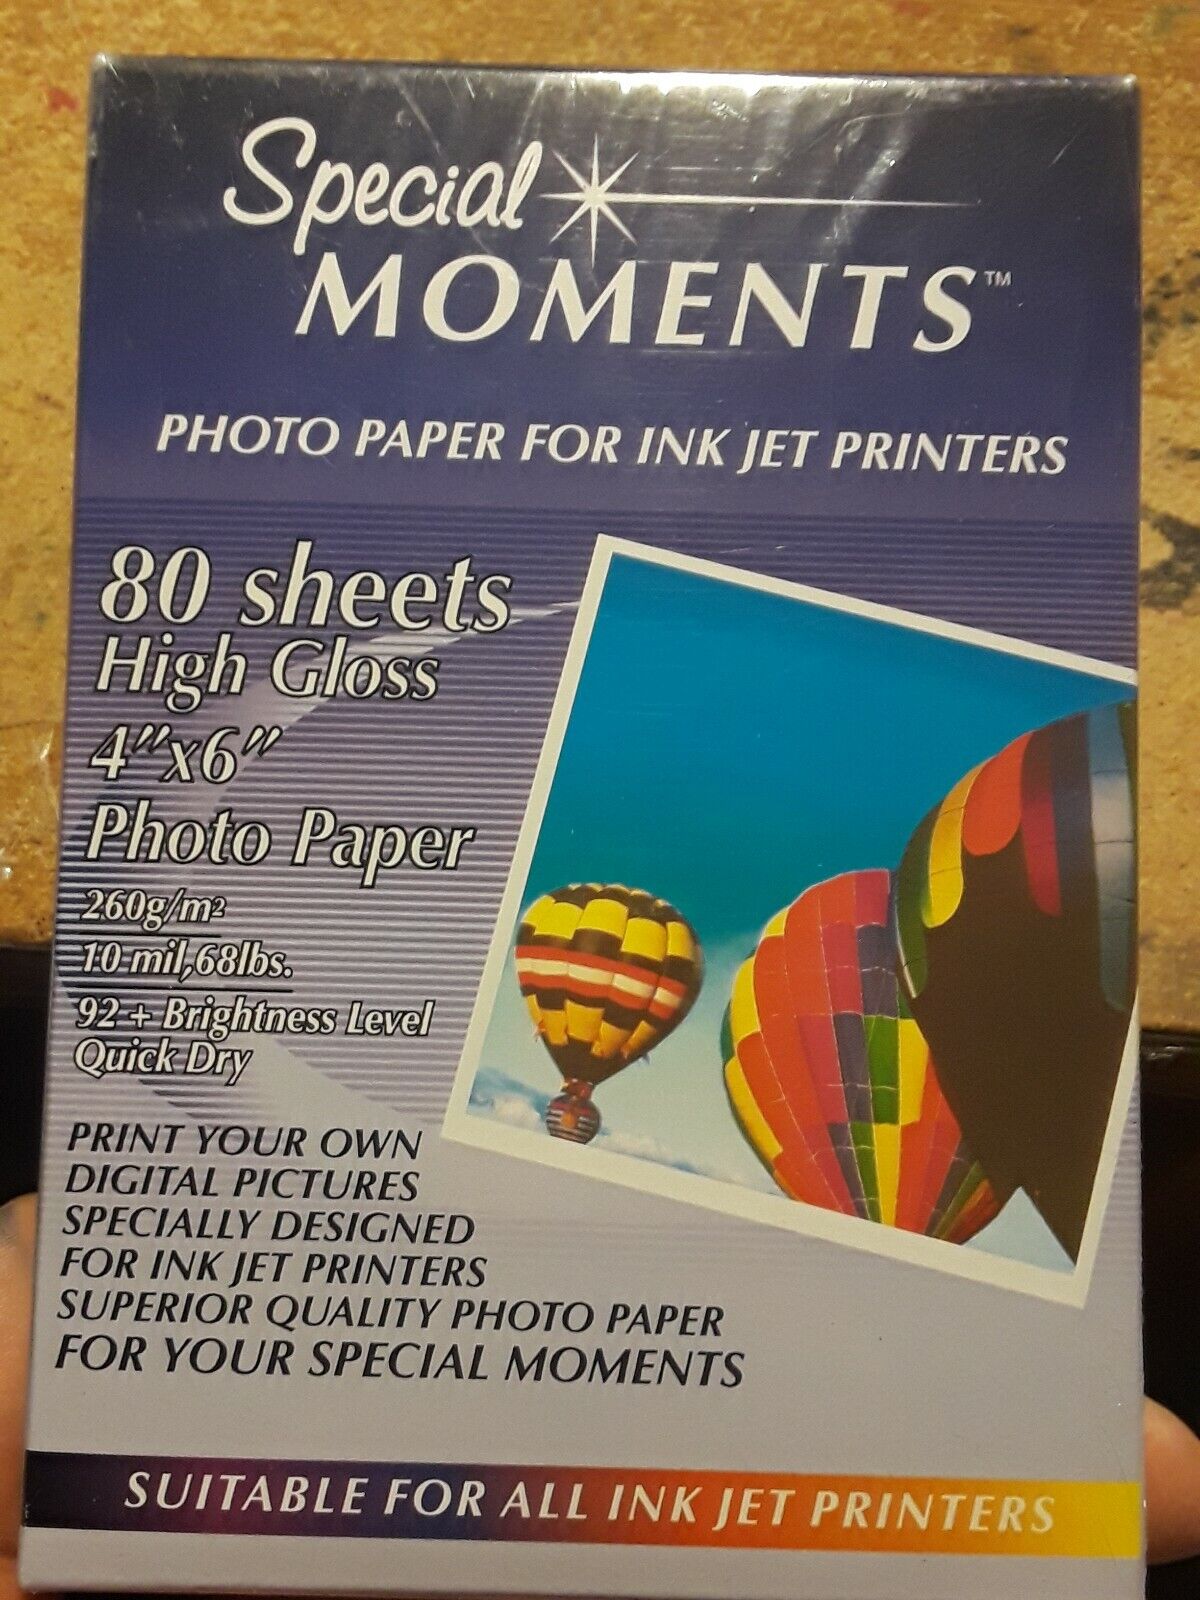 SPECIAL MOMENTS PHOTO PAPER FOR INK JET PRINTERS GLOSSY 4" X 6" - 80 SHEETS- NEW